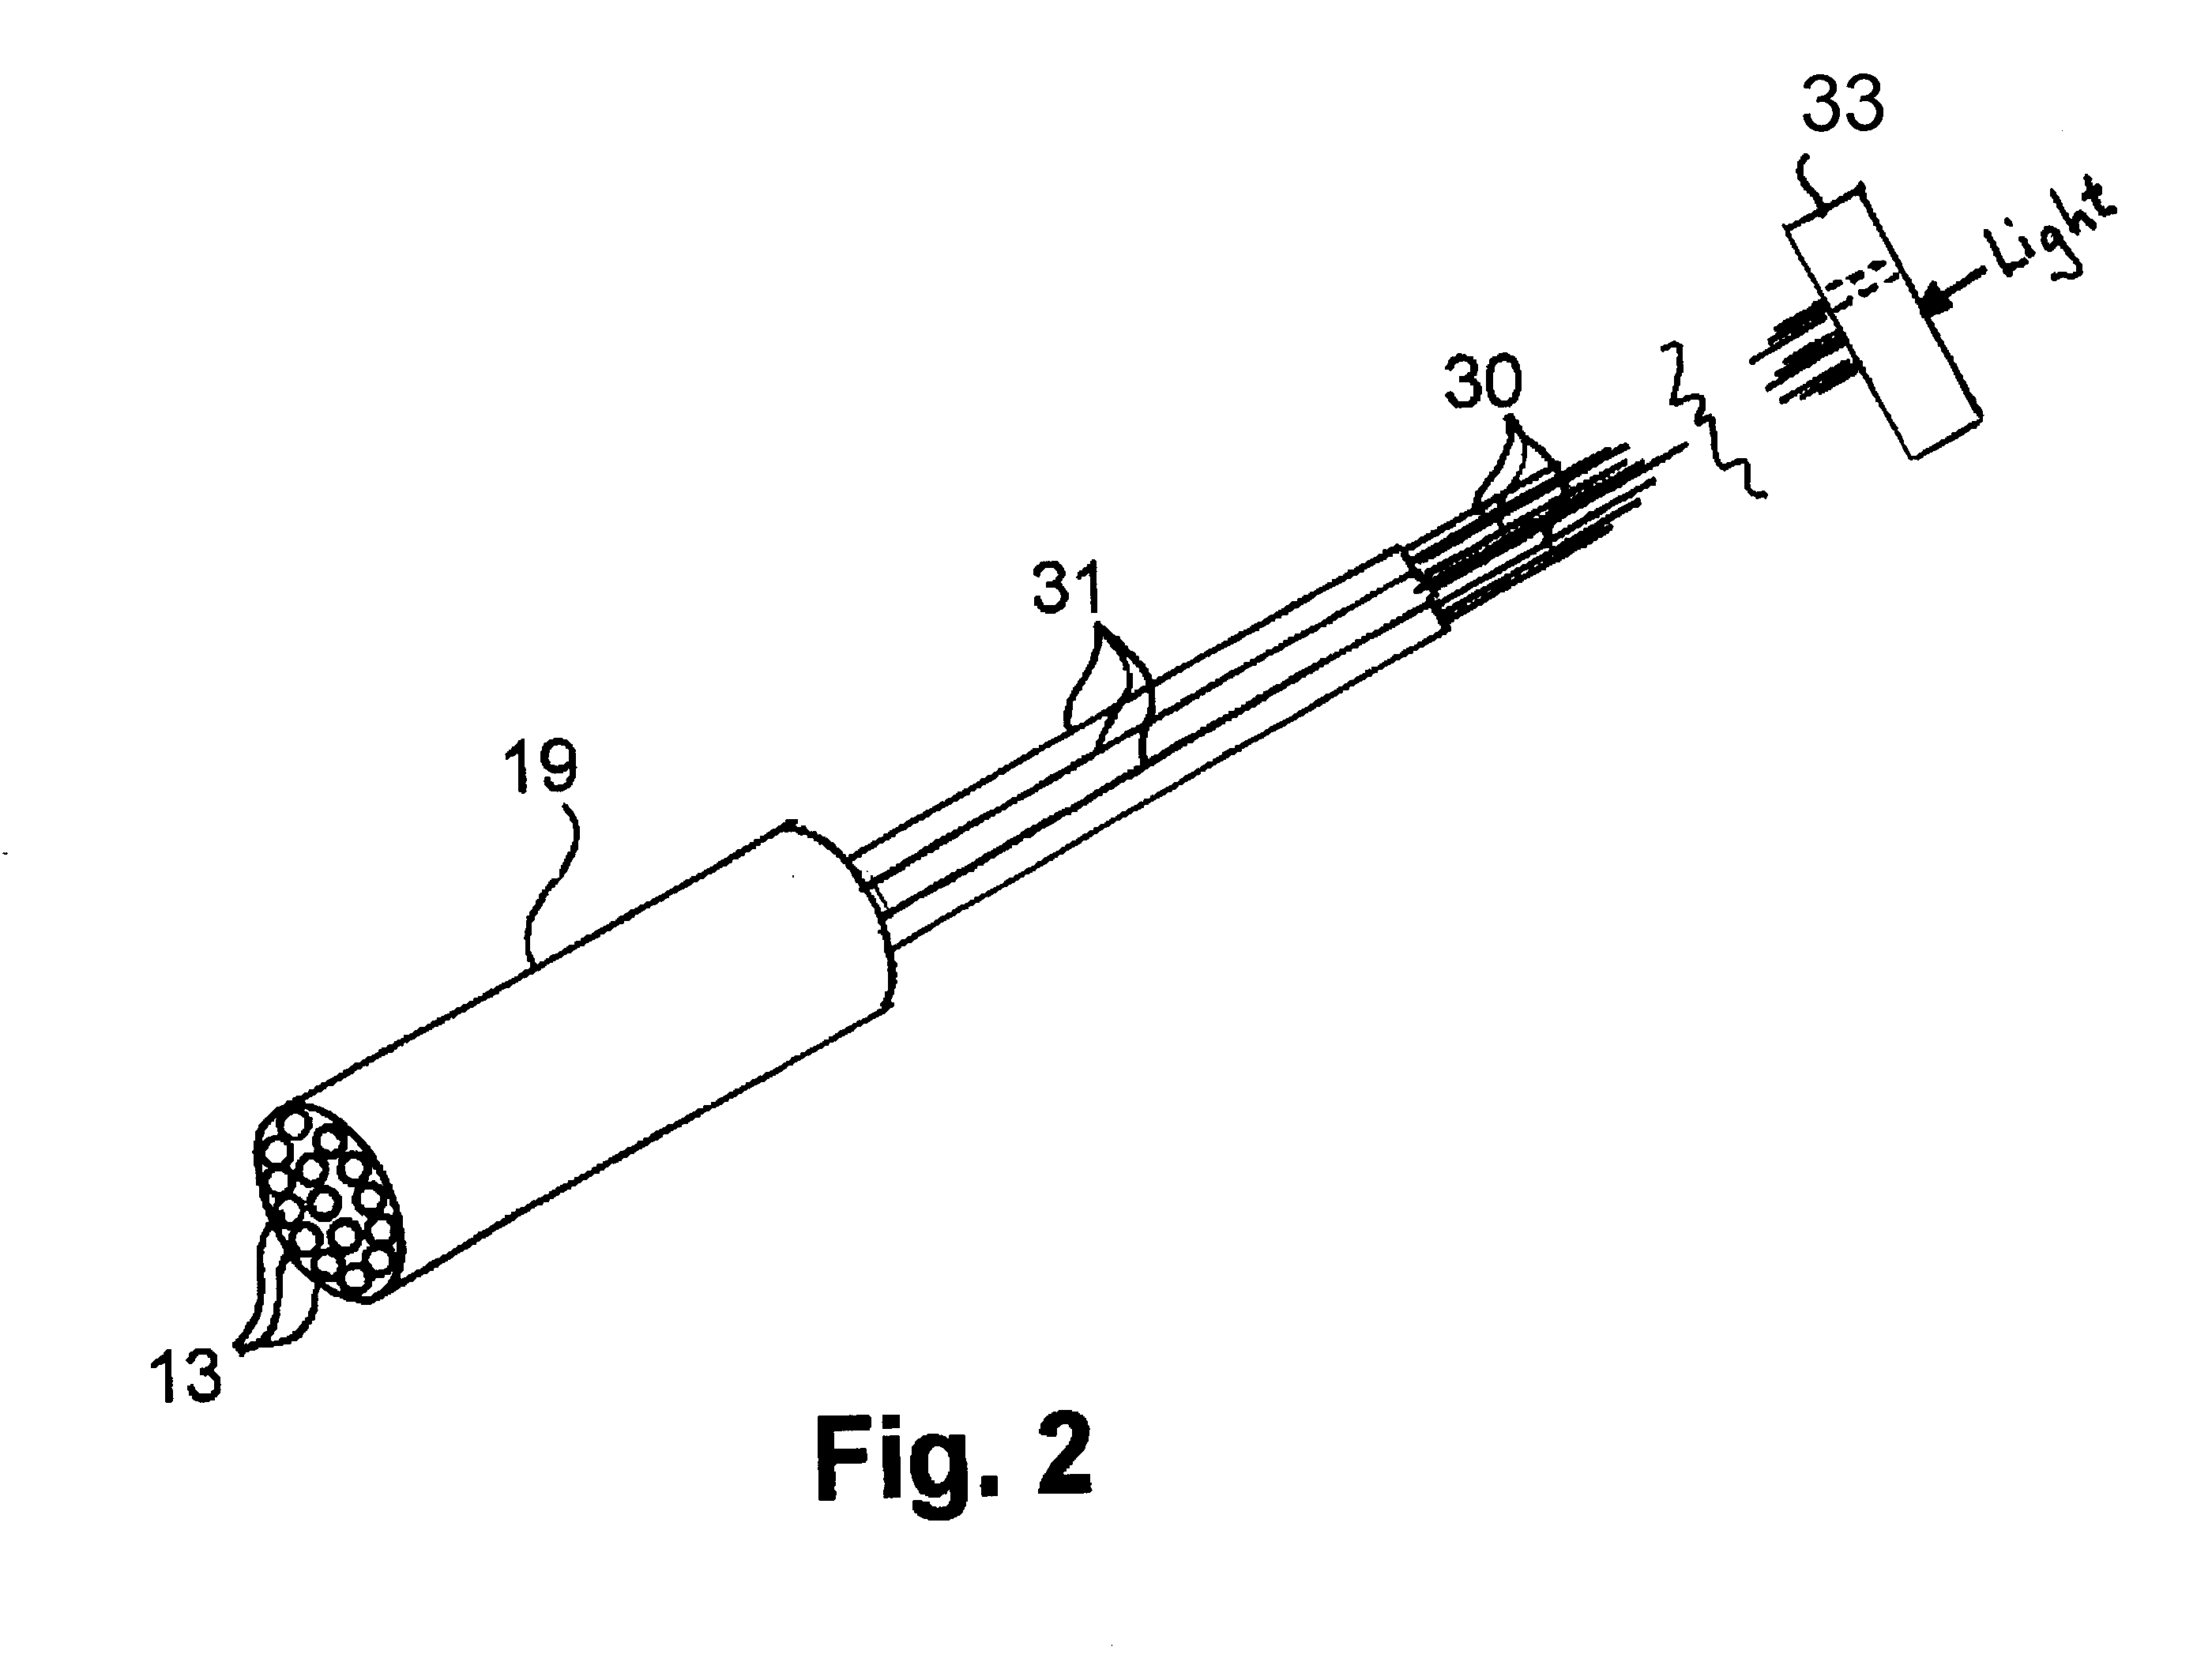 Downhole lens assembly for use with high power lasers for earth boring